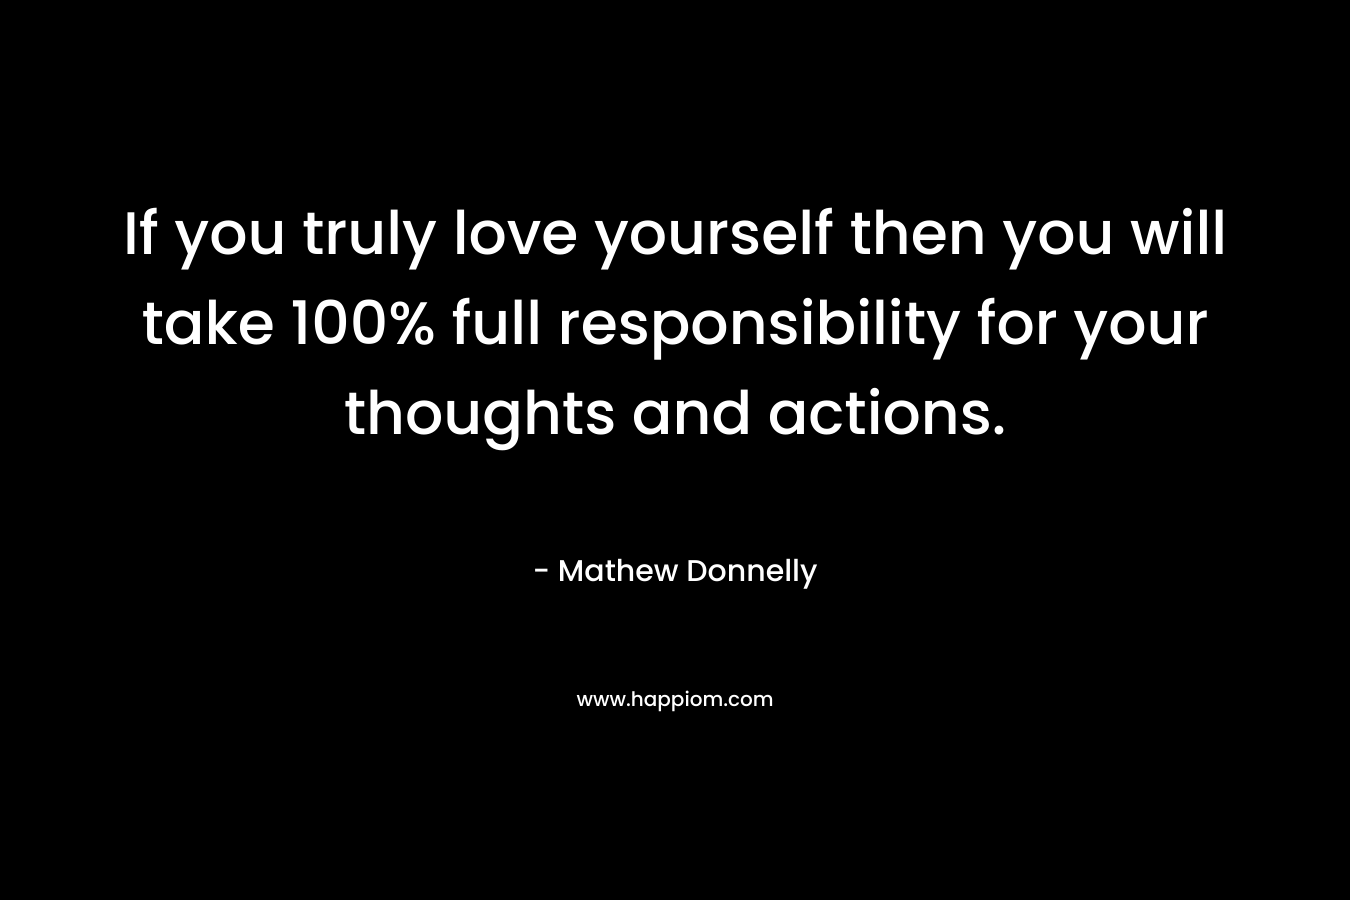 If you truly love yourself then you will take 100% full responsibility for your thoughts and actions.